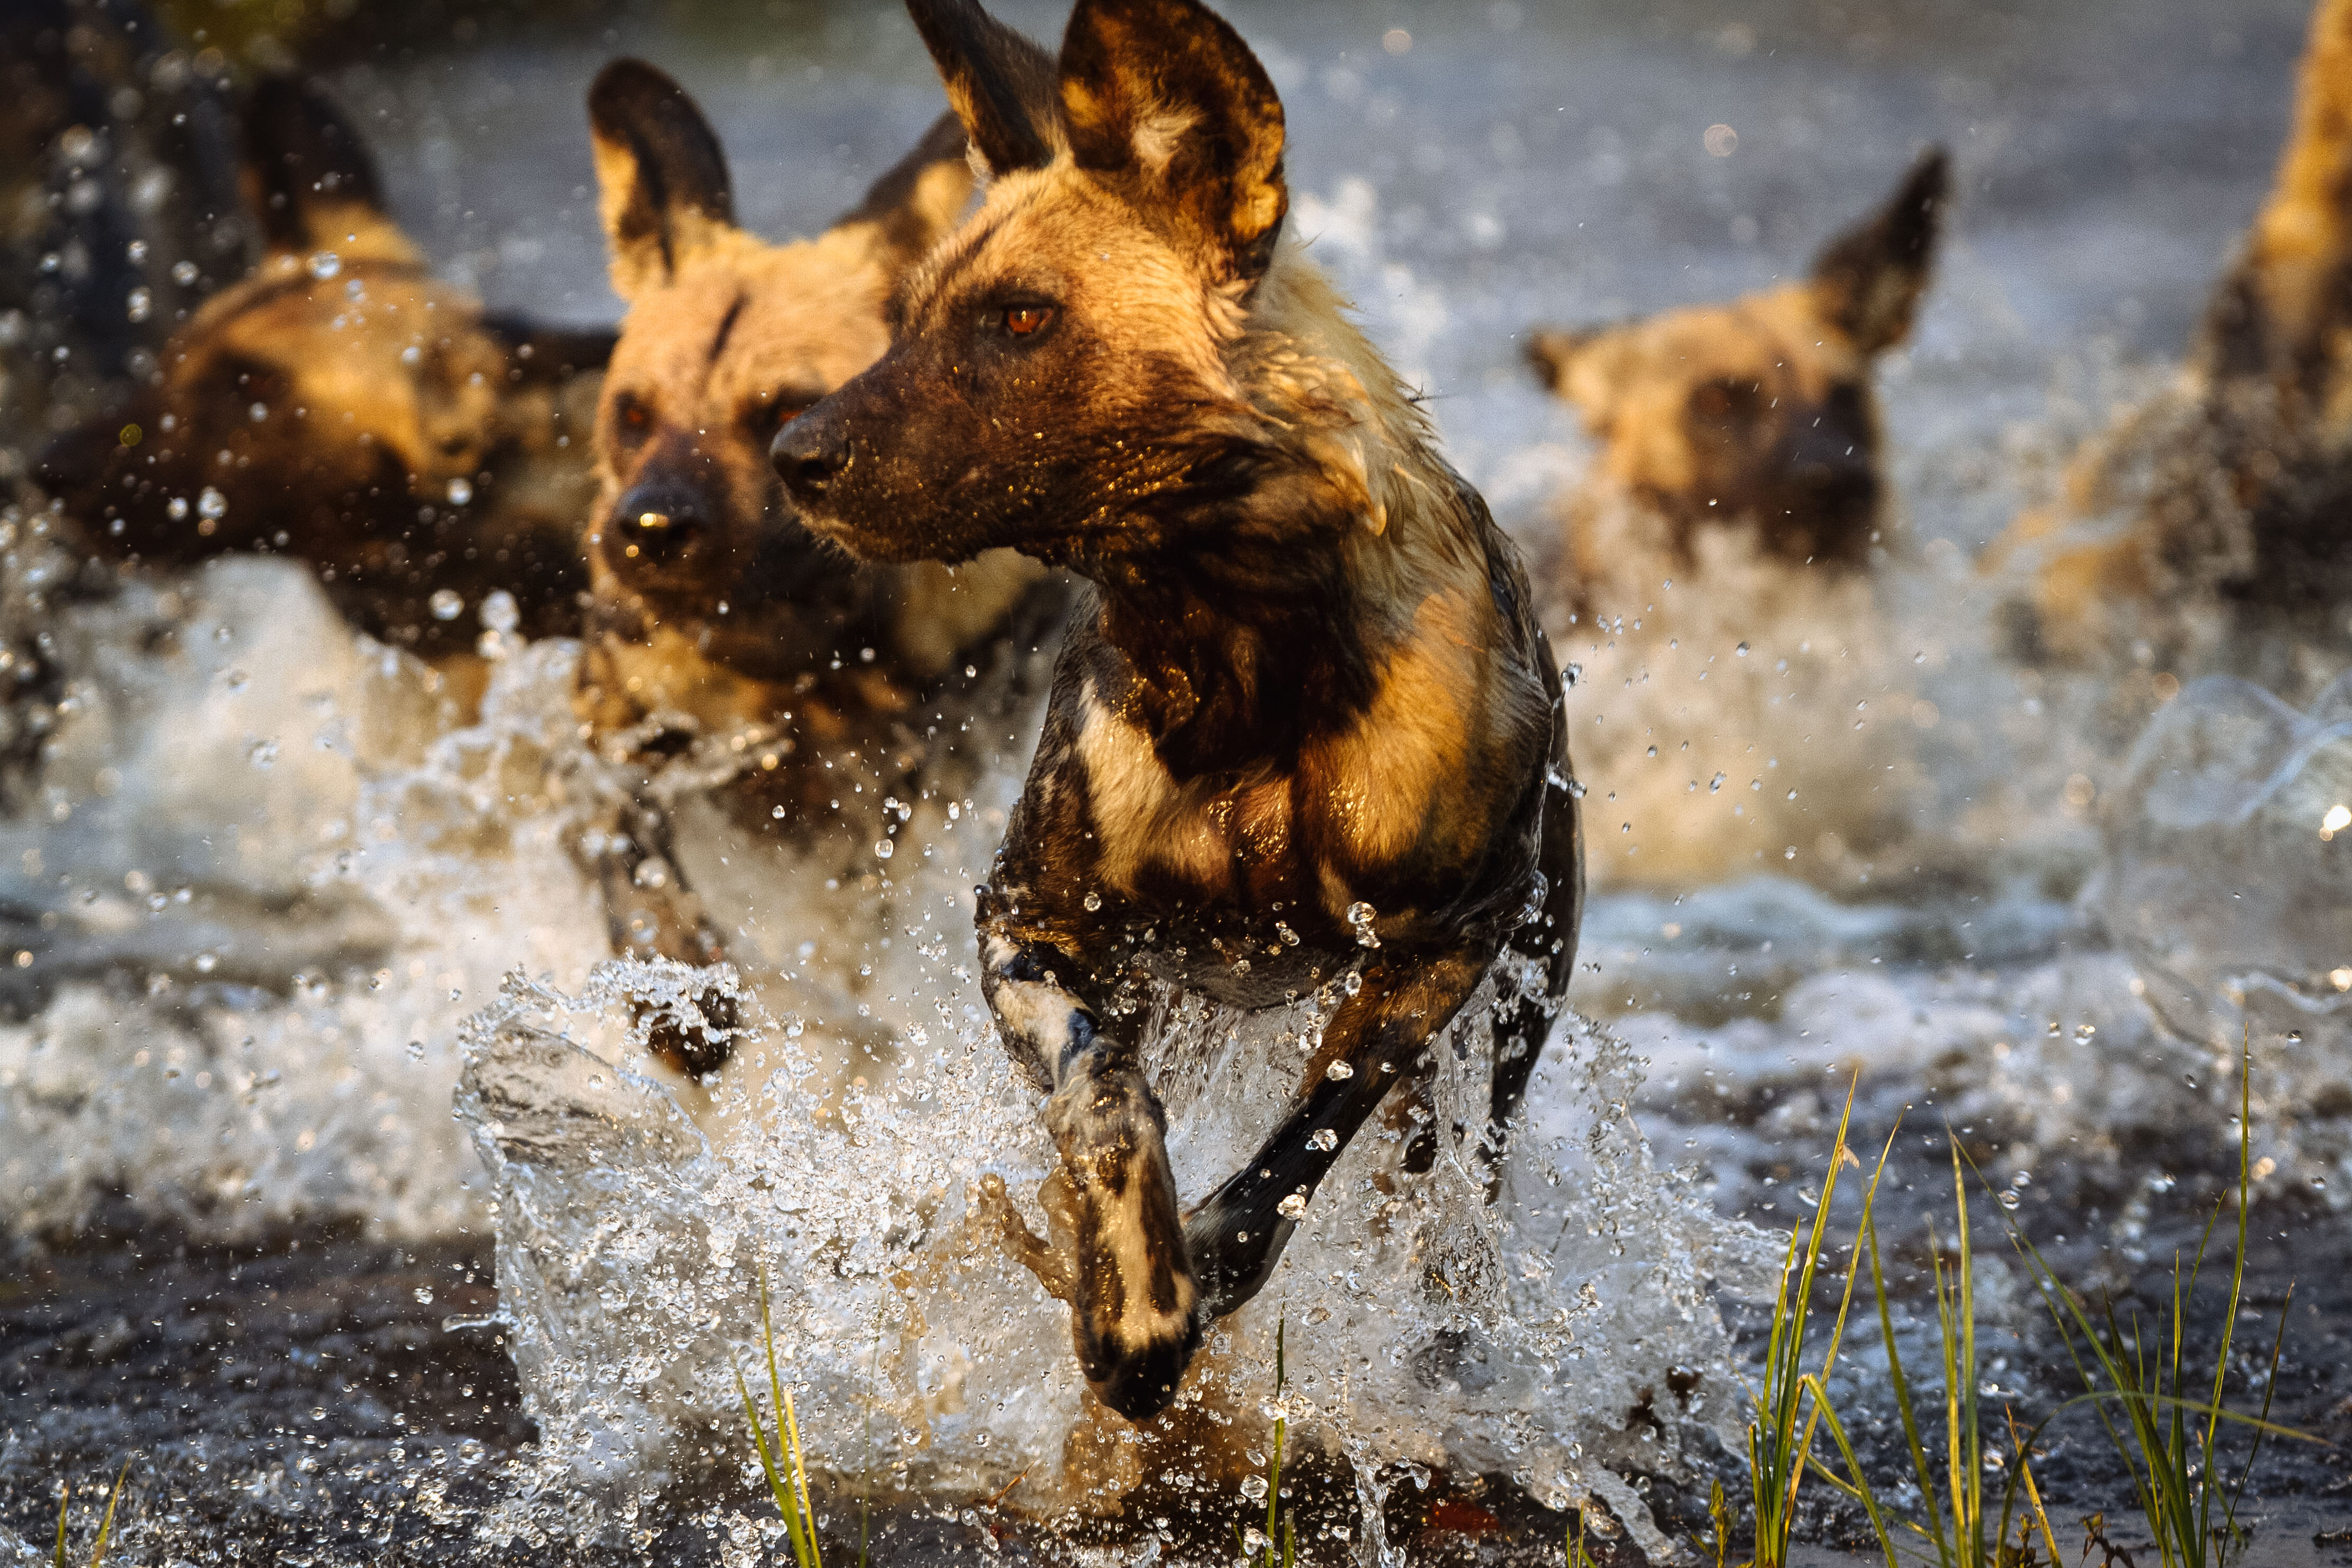 types of african dogs